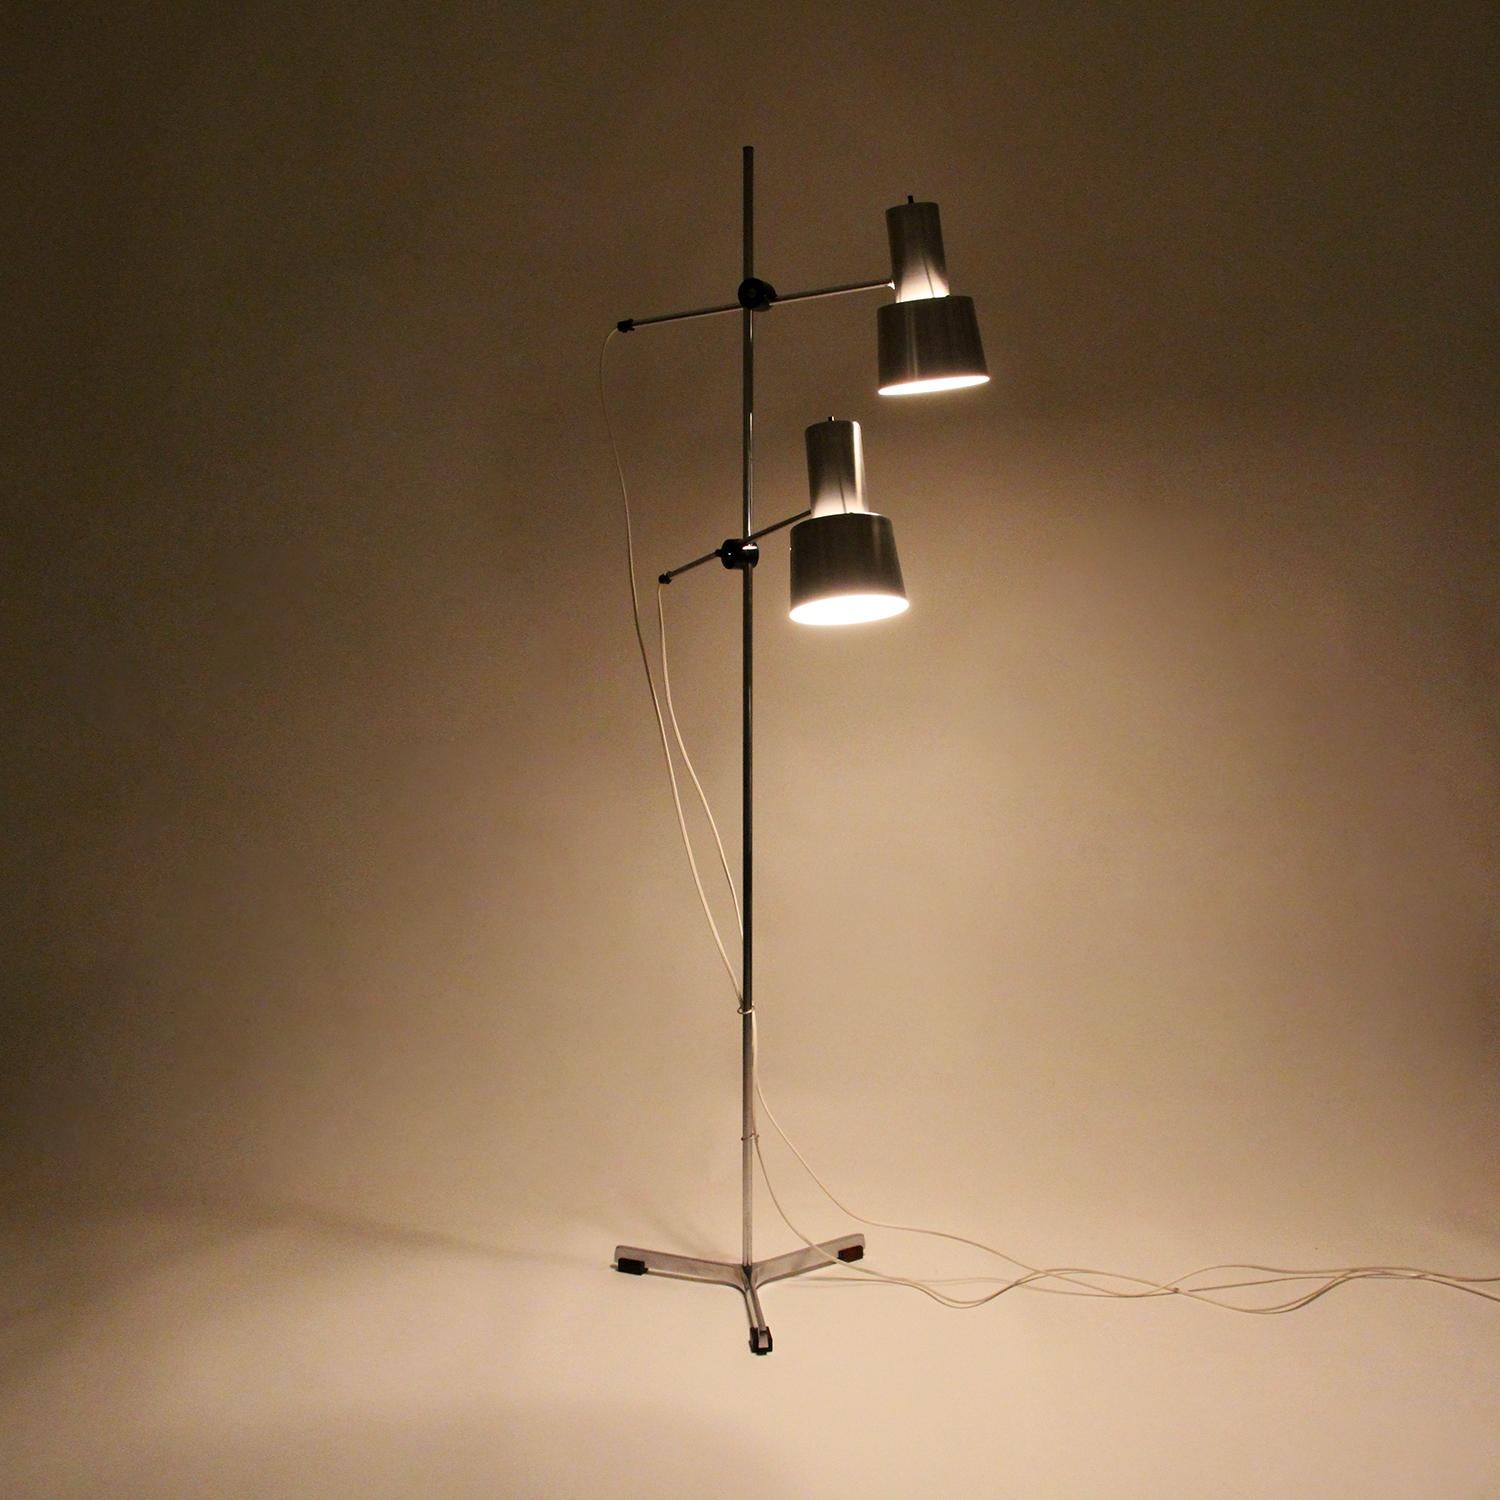 Aluminum floor lamp from the 1970s by Fog & Mørup (presumed) - Scandinavian vintage floor lamp with two adjustable aluminum shades in very good vintage condition!

A beautiful piece made up by a three-legged aluminum lacquered metal base with